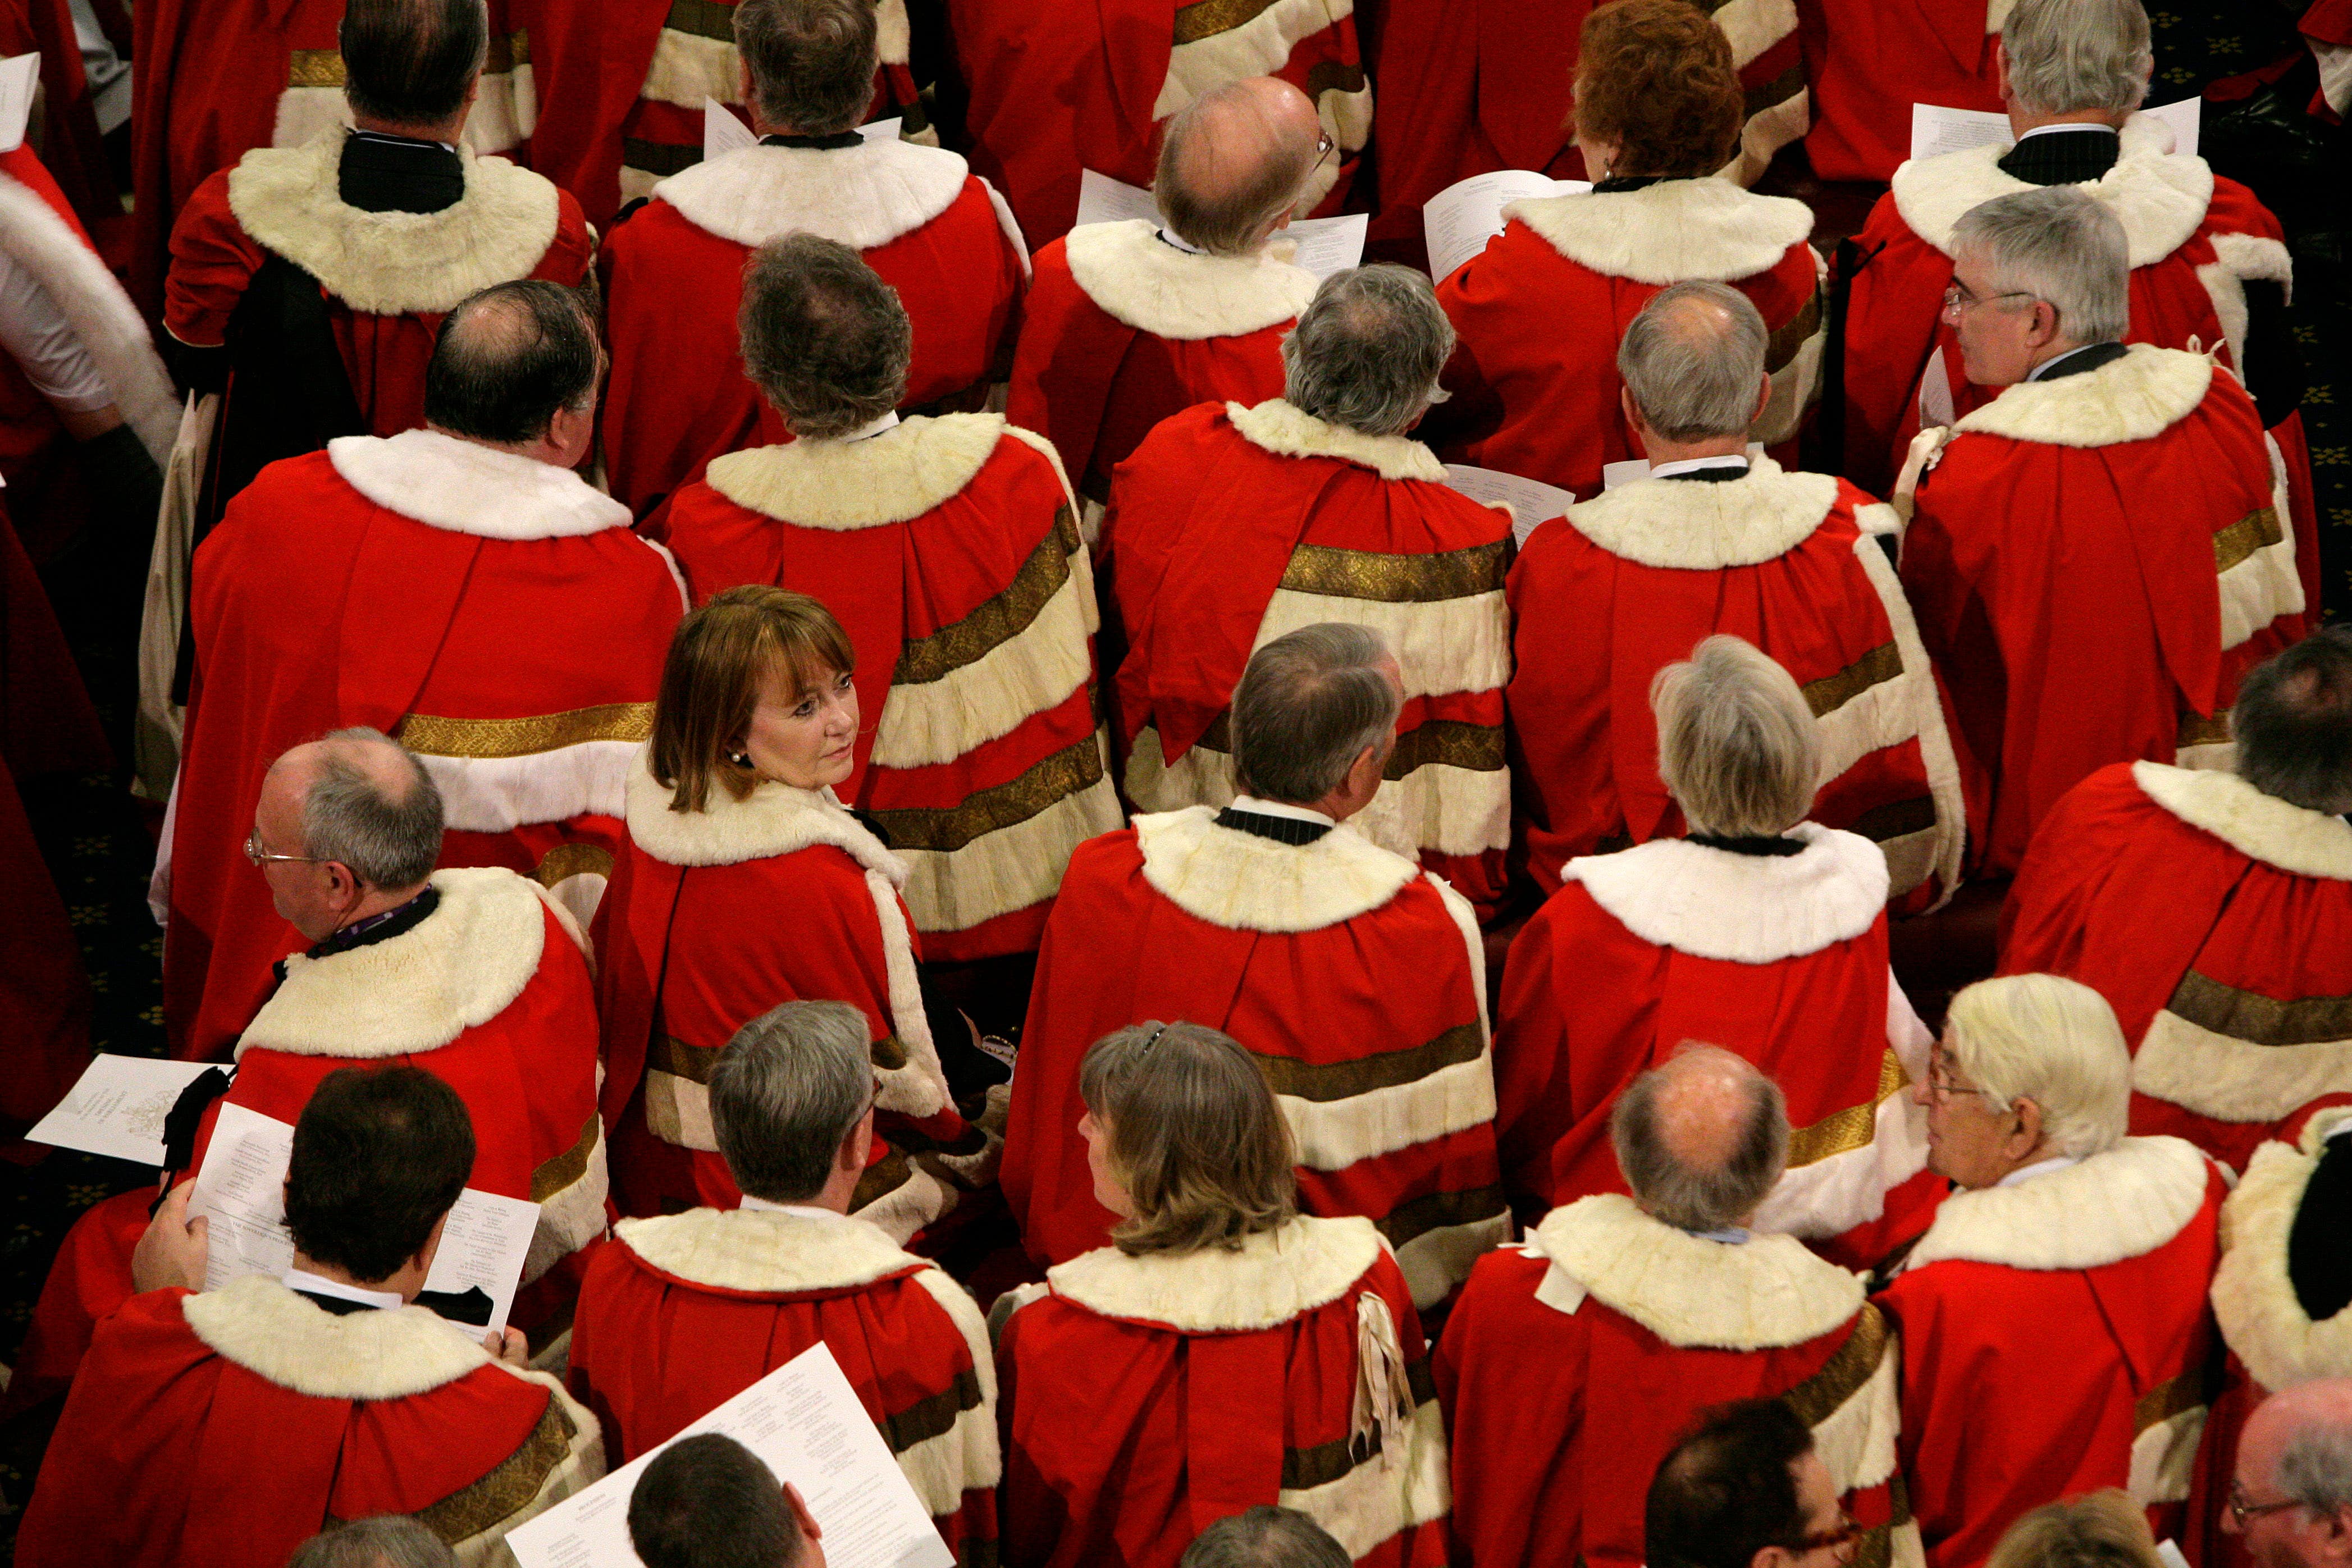 Labour announced its desire to scrap the Lords earlier this week